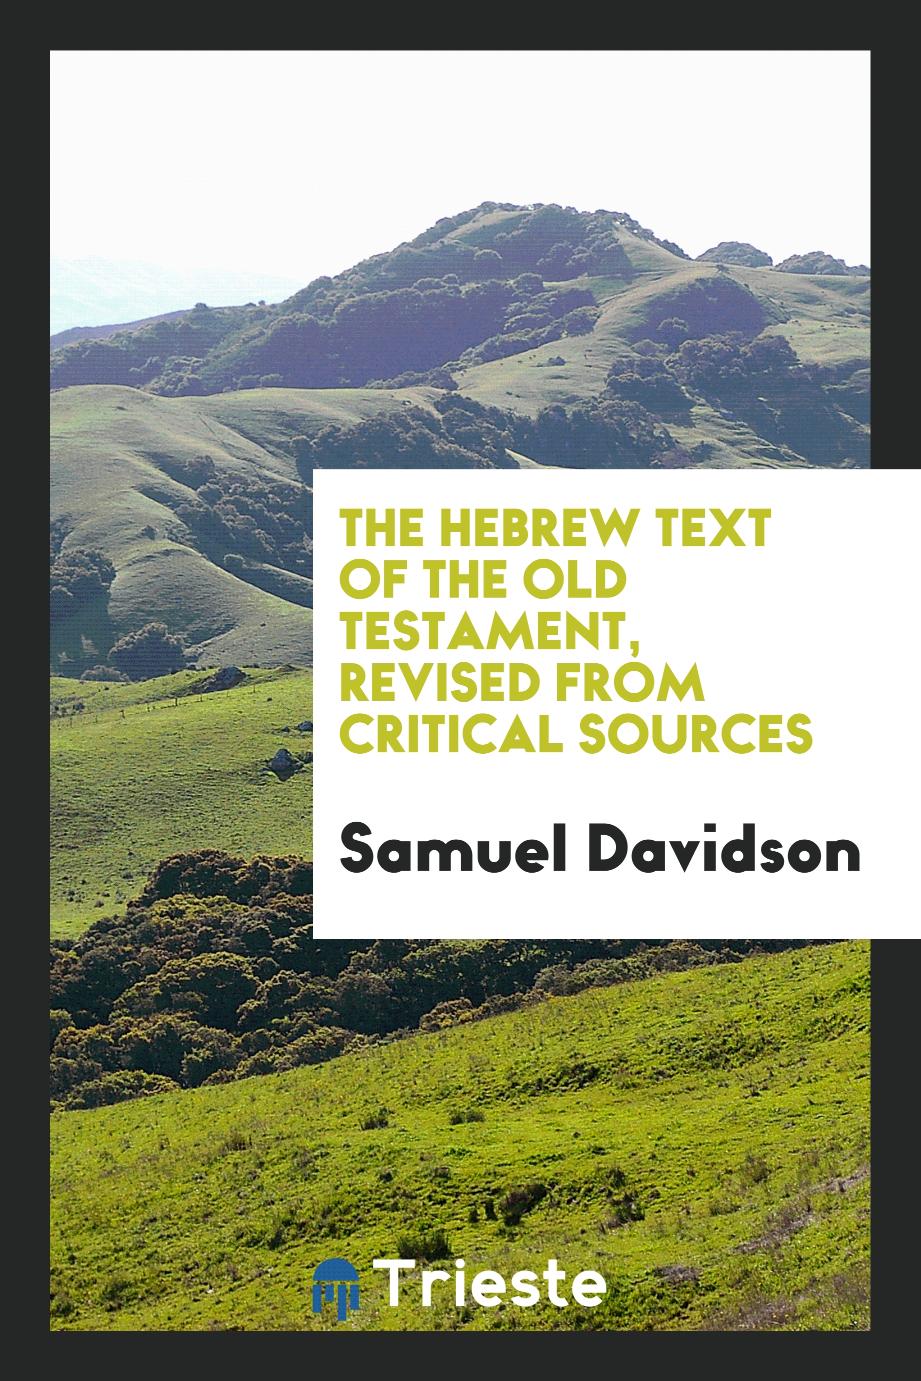 The Hebrew text of the Old Testament, revised from critical sources